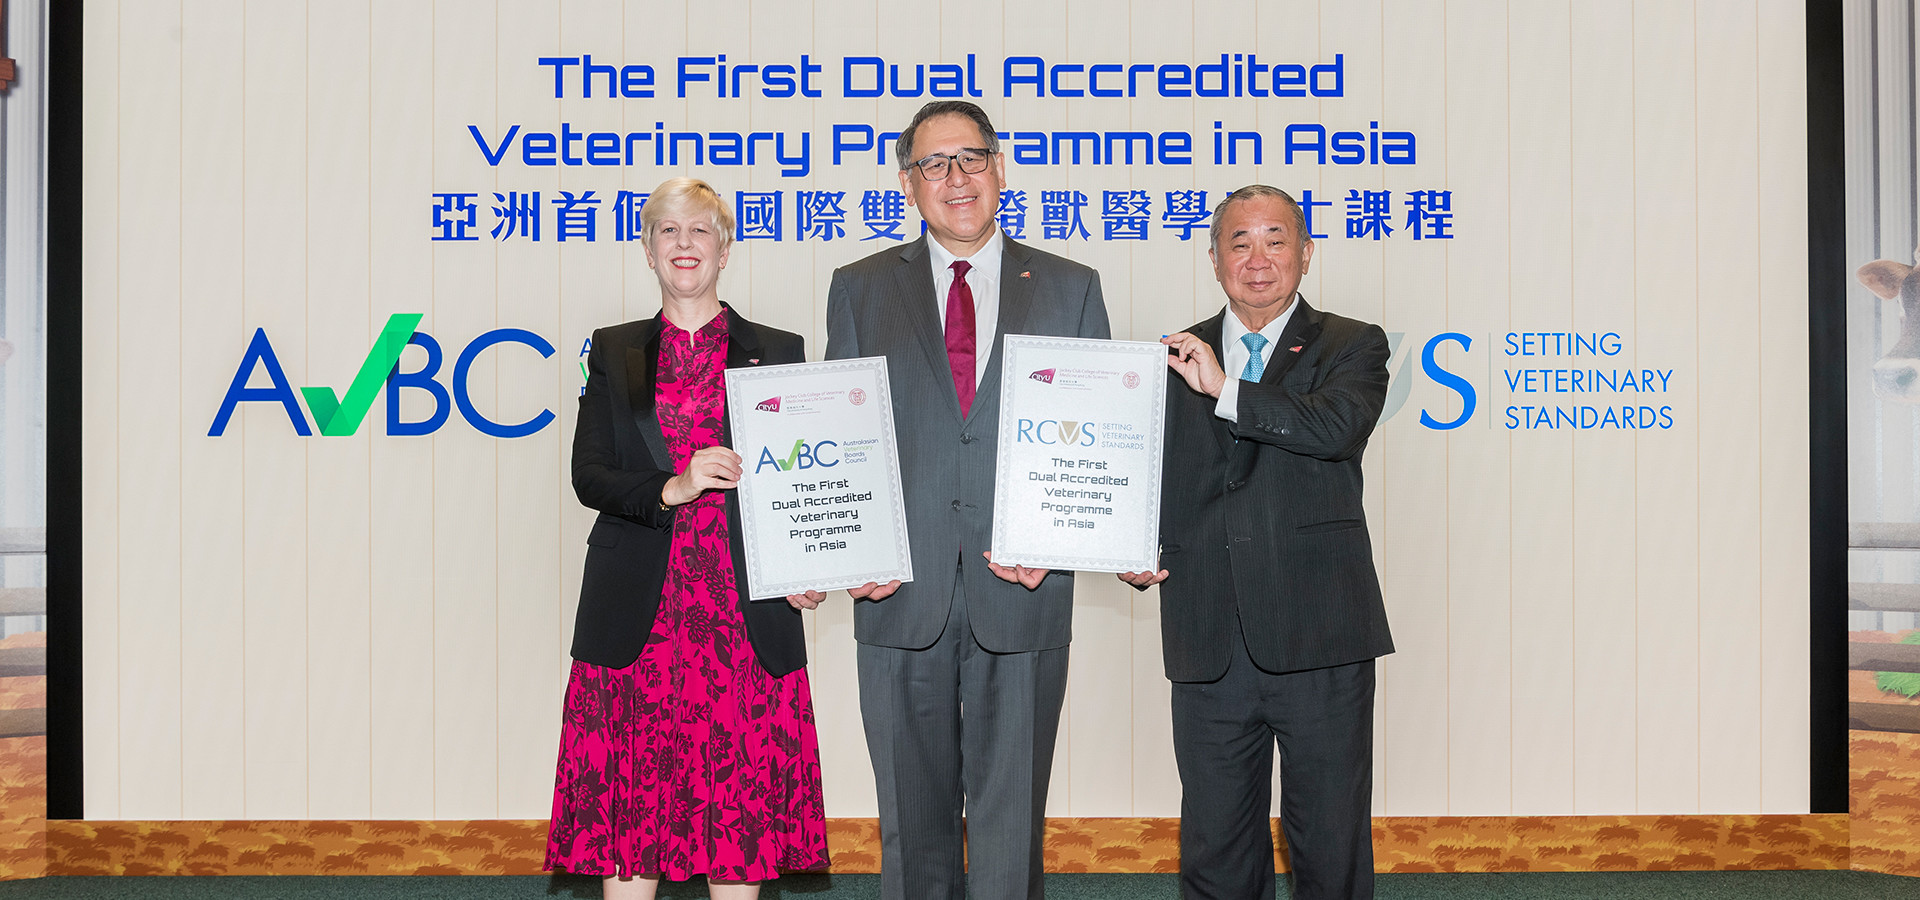 1st dual accredited vet programme in Asia